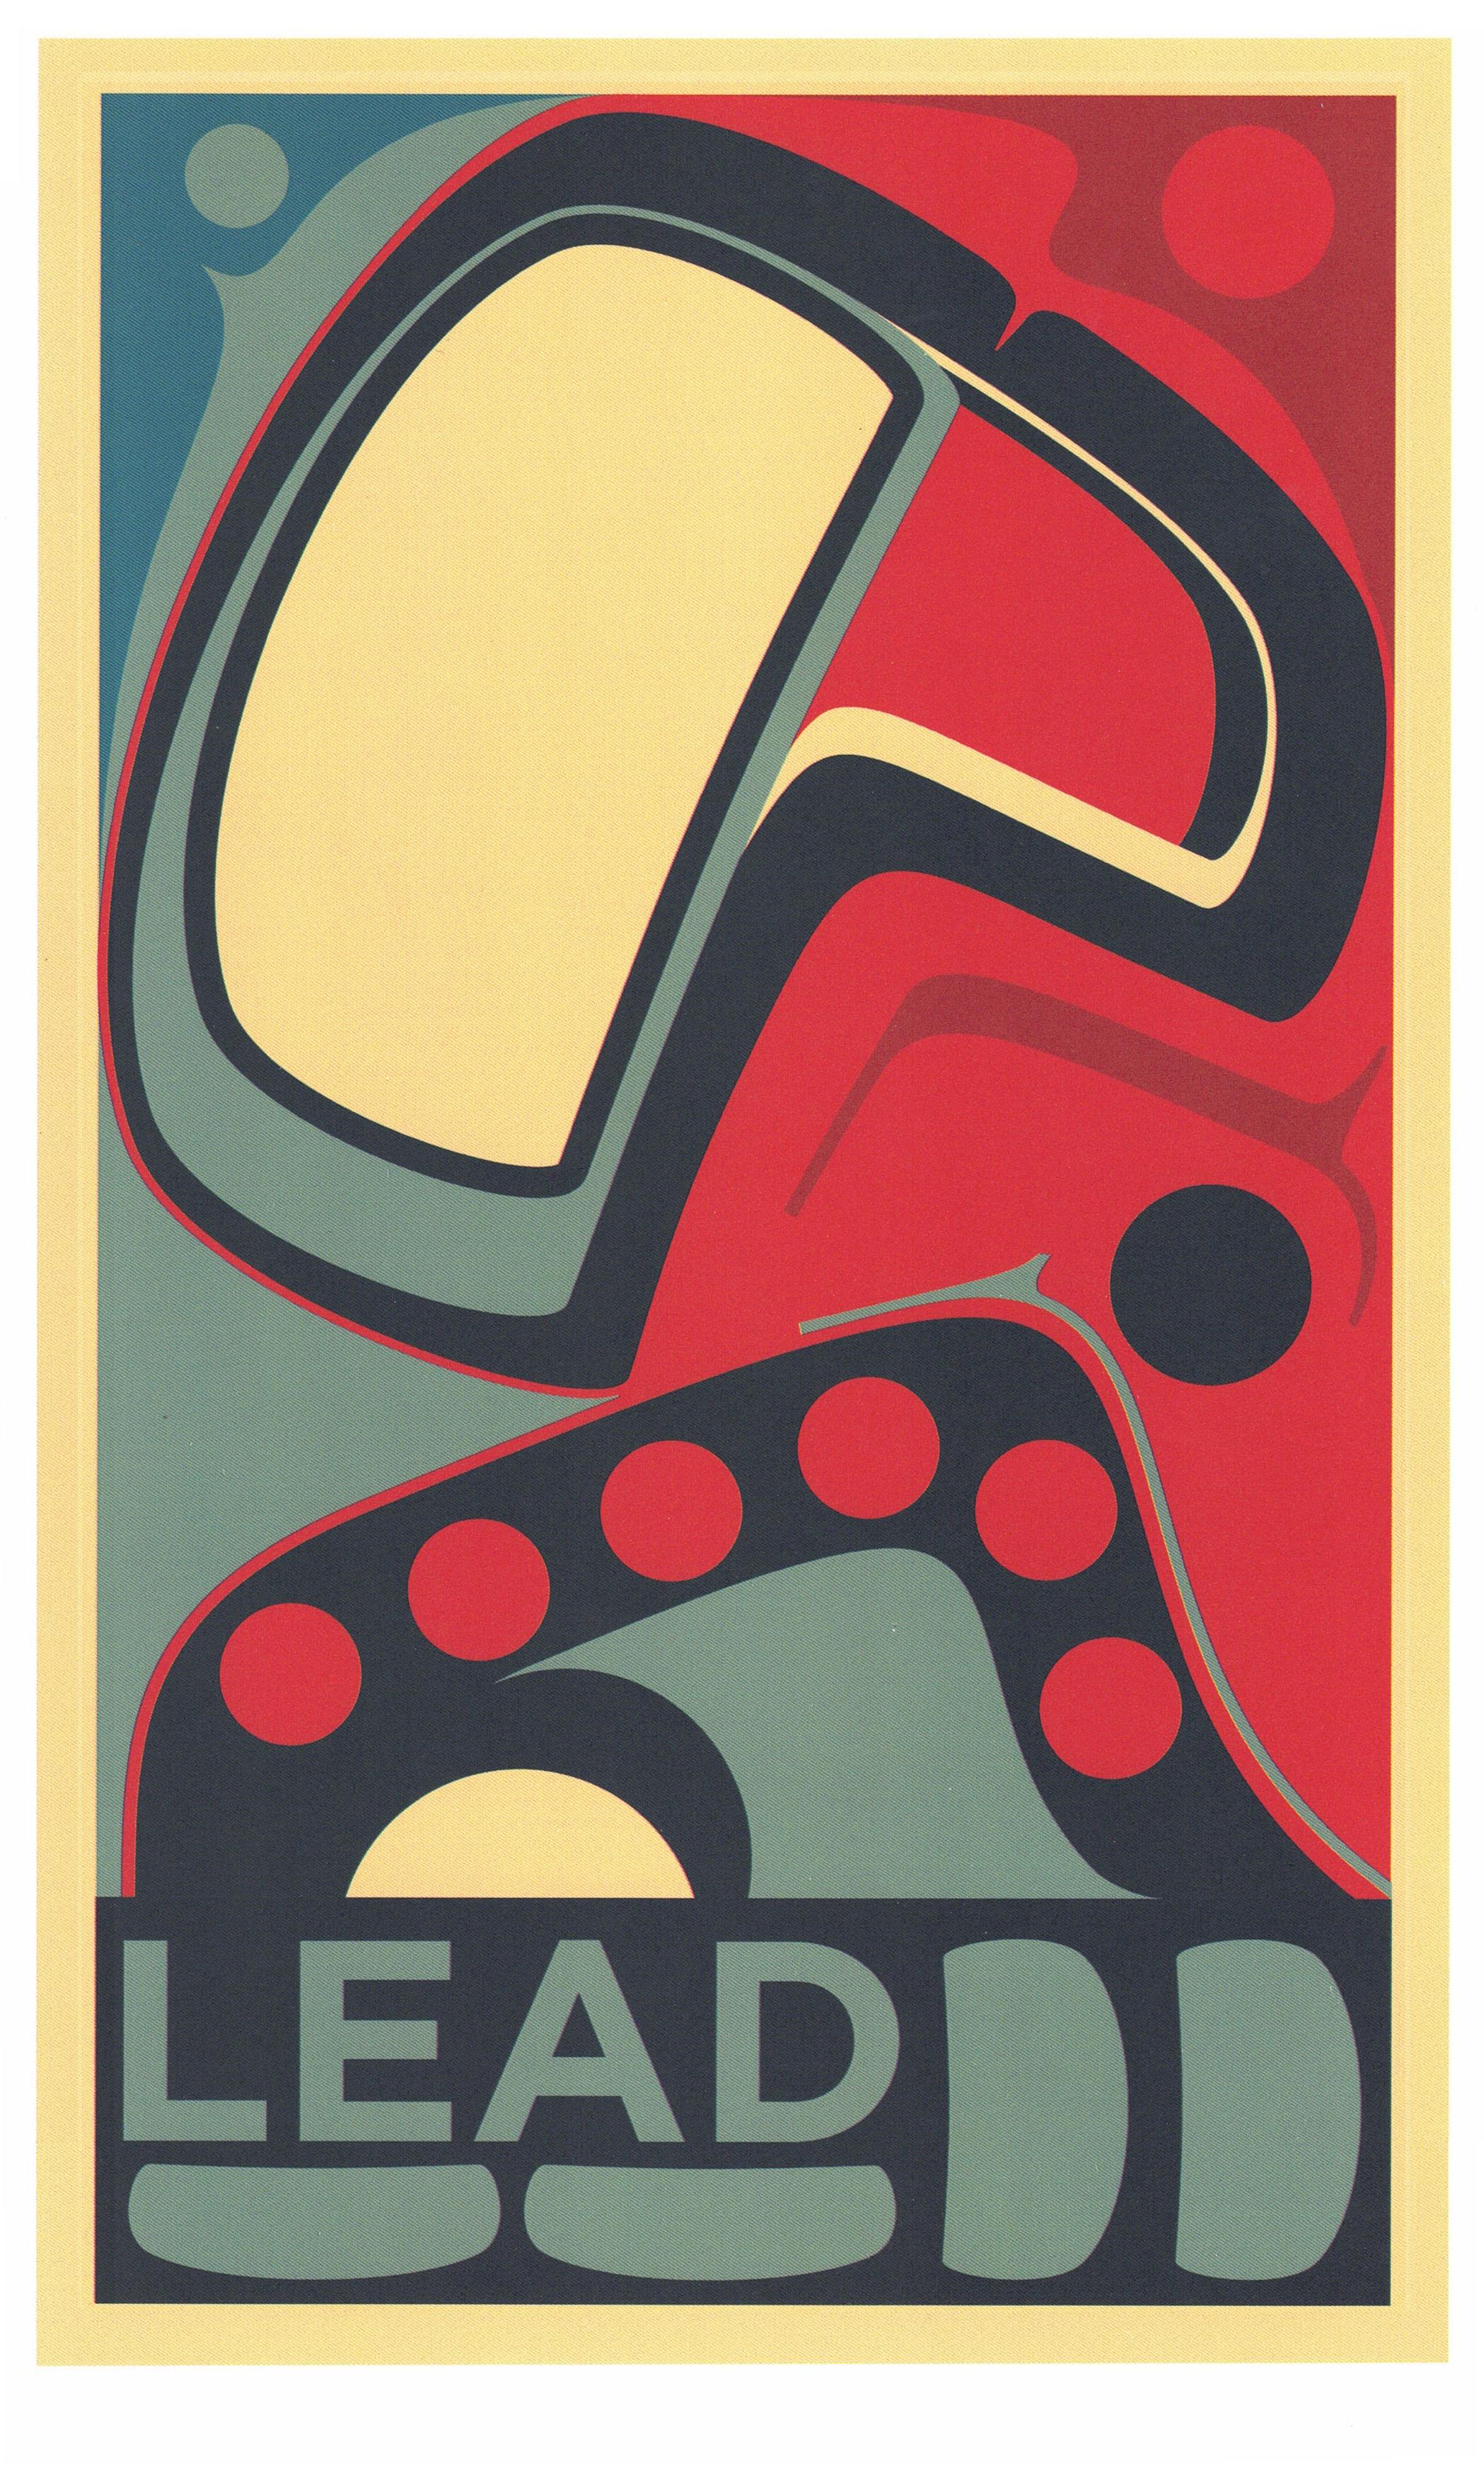 Sonny Assu Abstract Print - There is Hope, If We Rise (Lead)